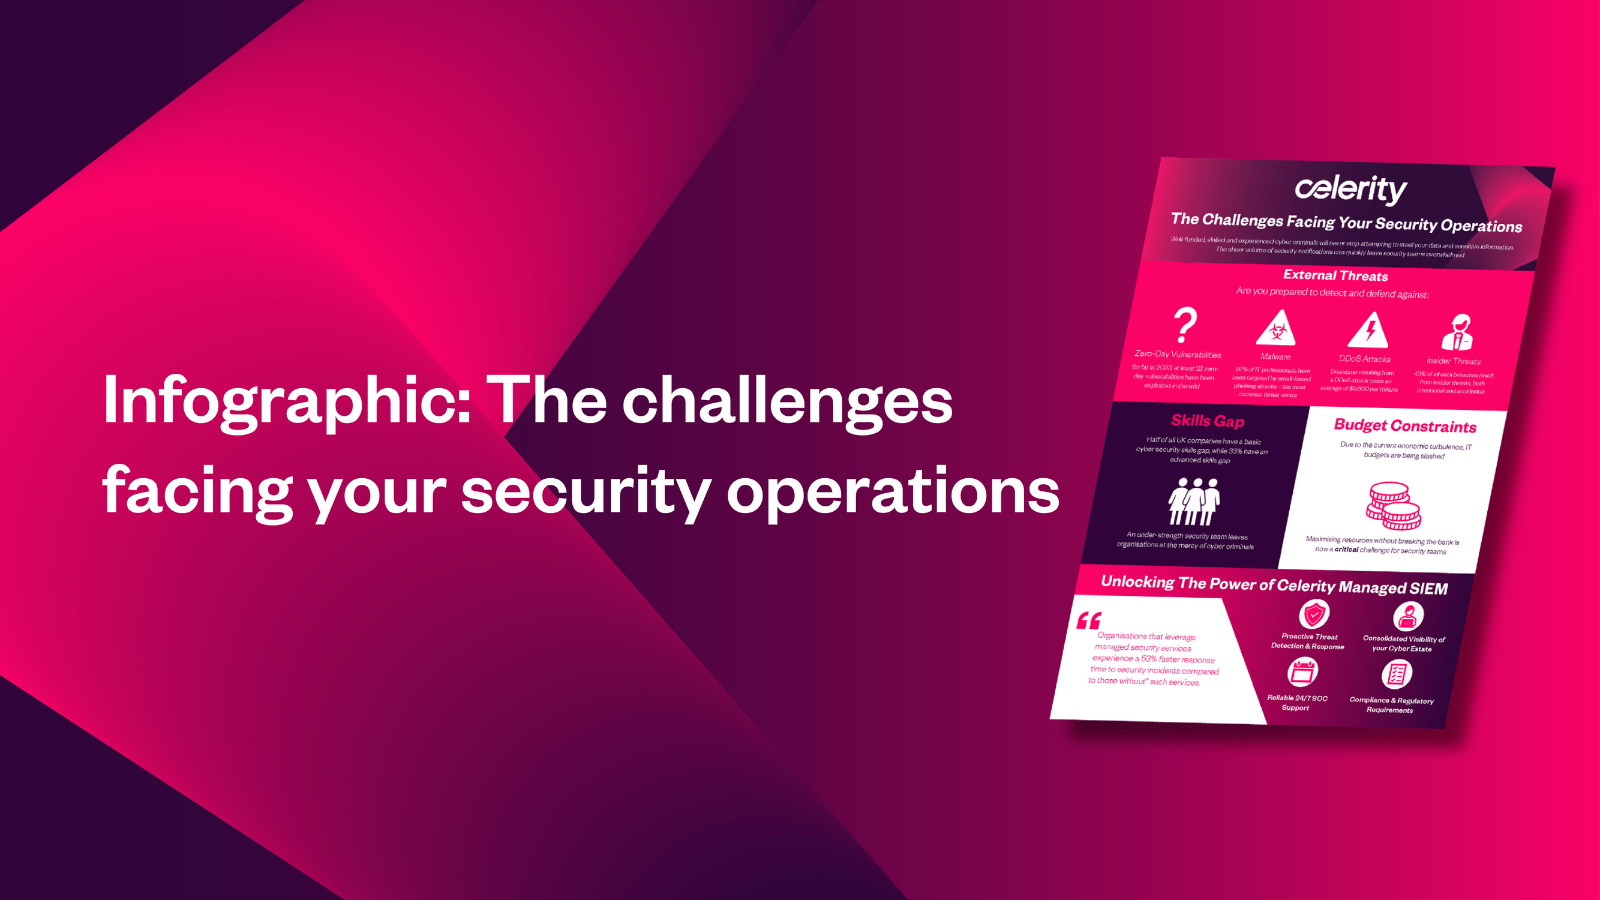 Infographic: The challenges facing your security operations